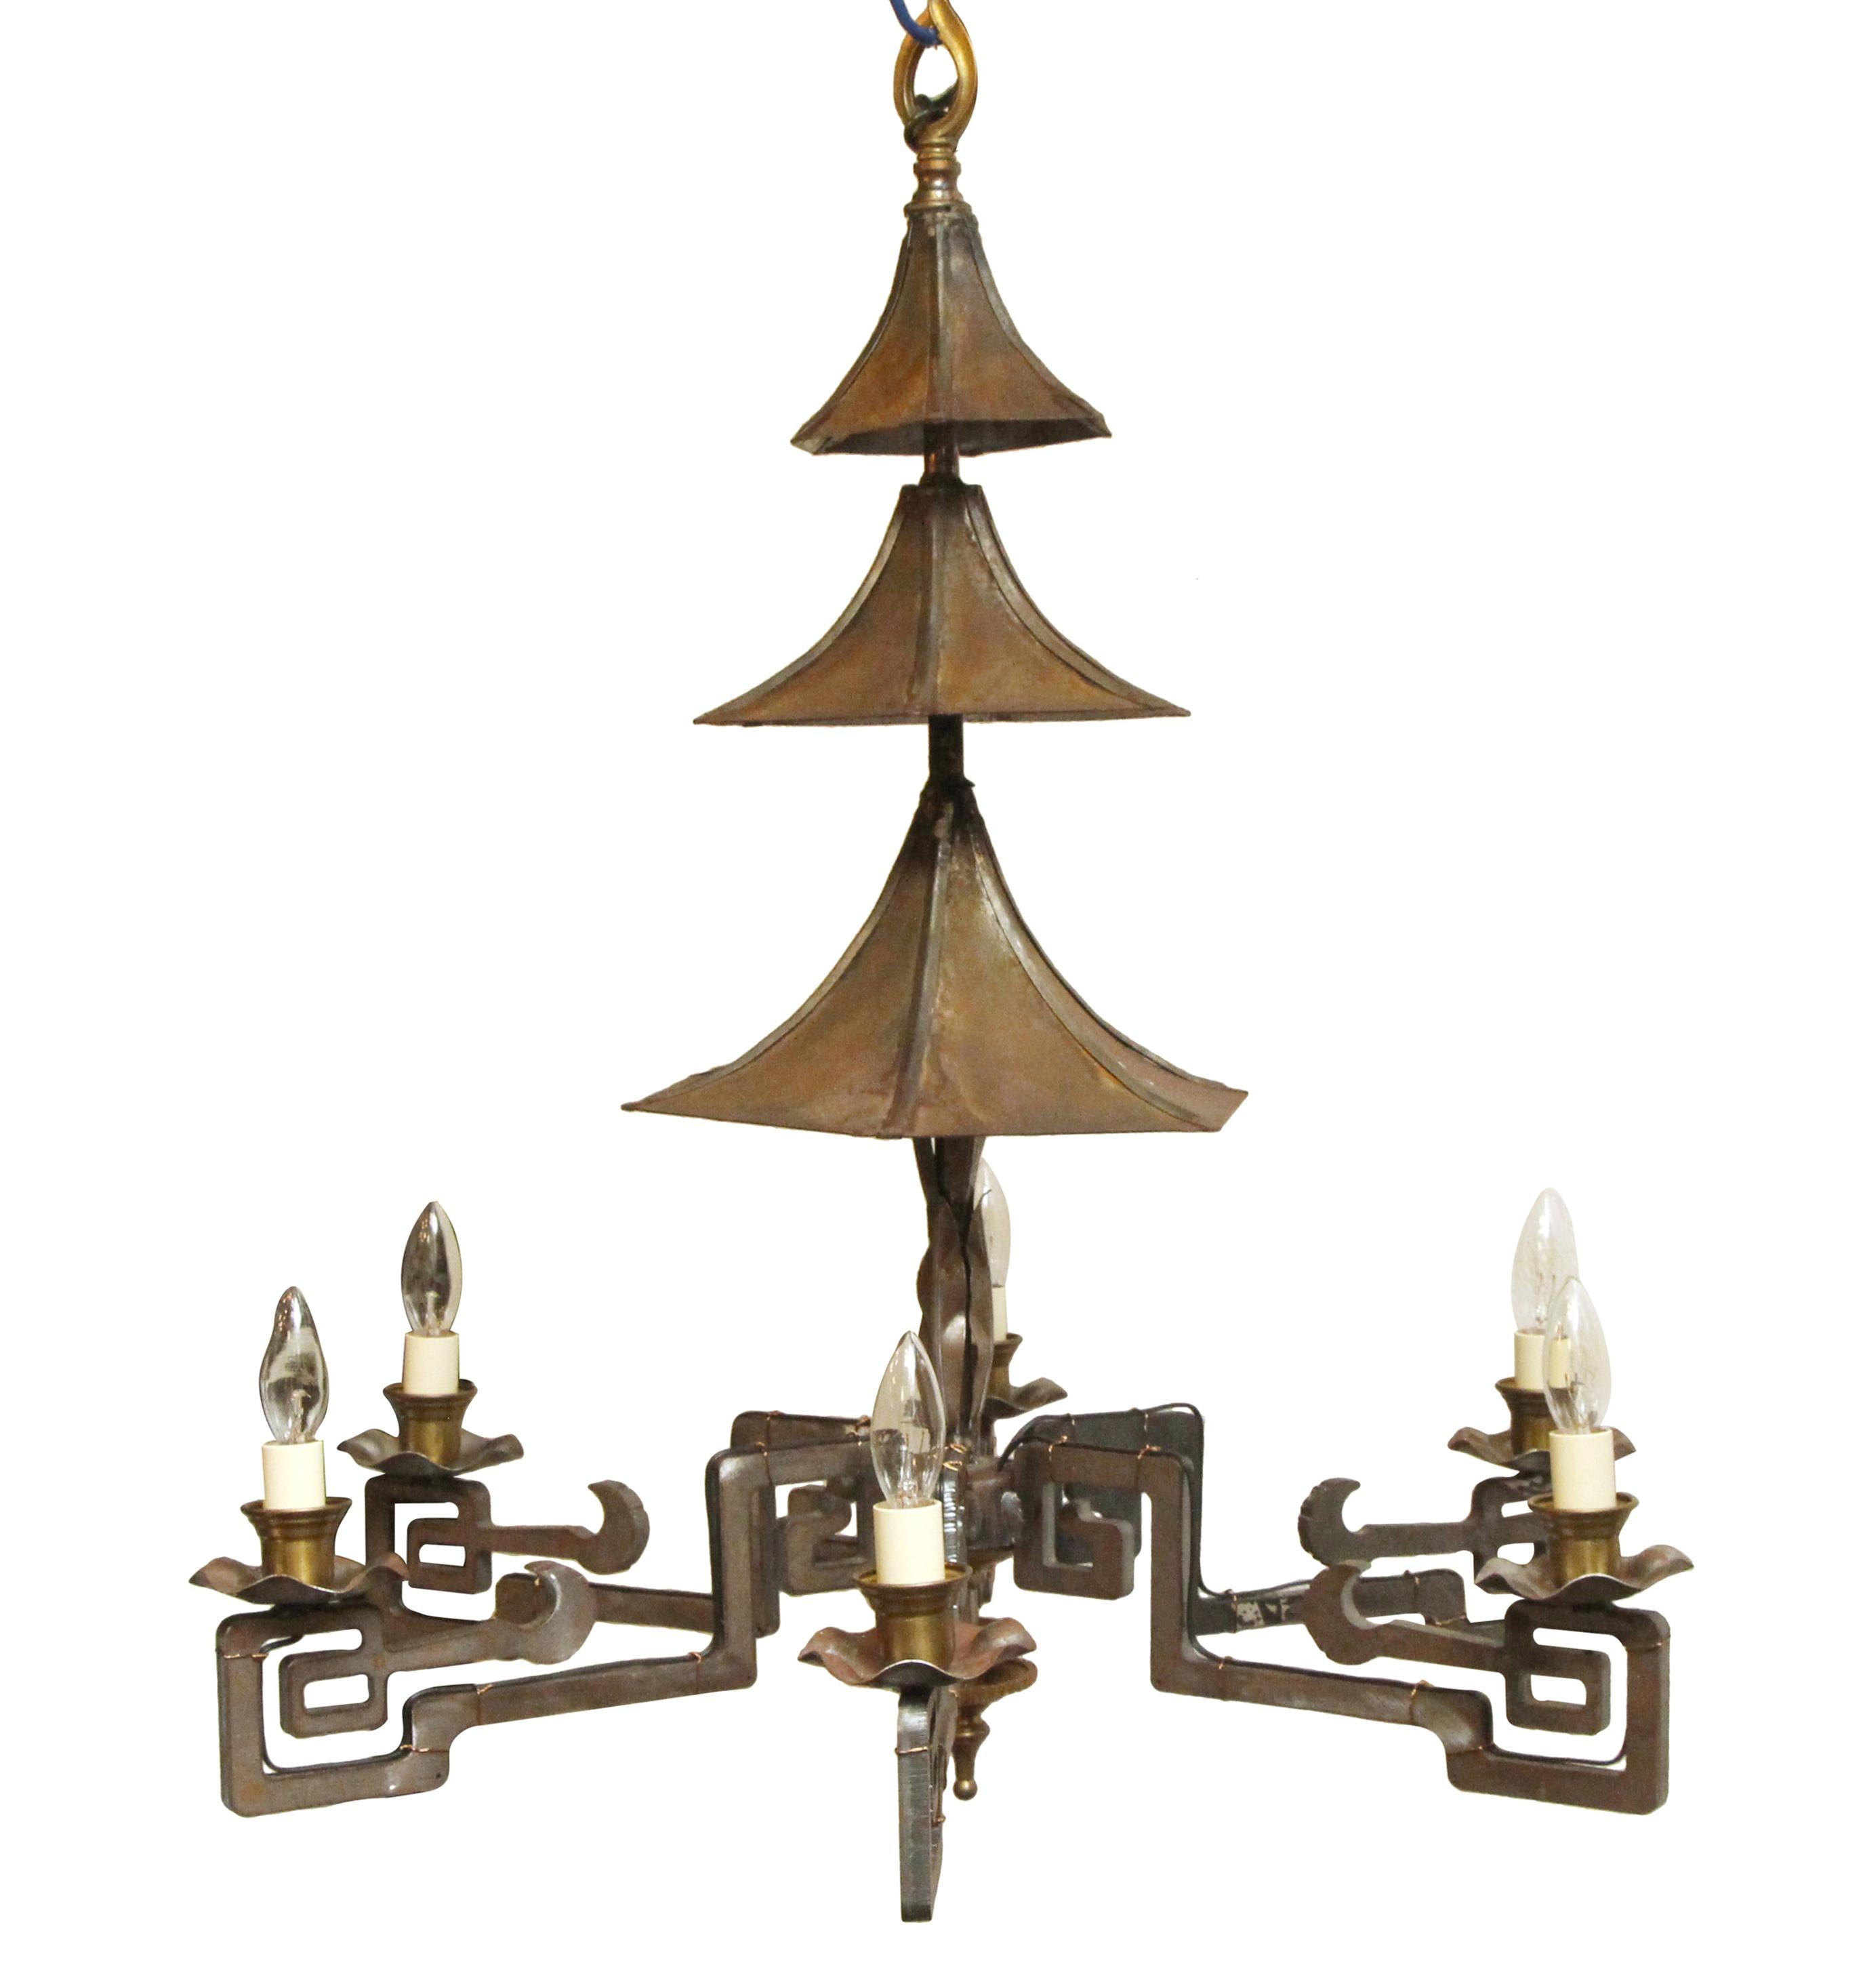 Brass and steel six-arm Chinese style chandelier with a pagoda motif. This can be seen at our 5 East 16th St location on Union Square in Manhattan.